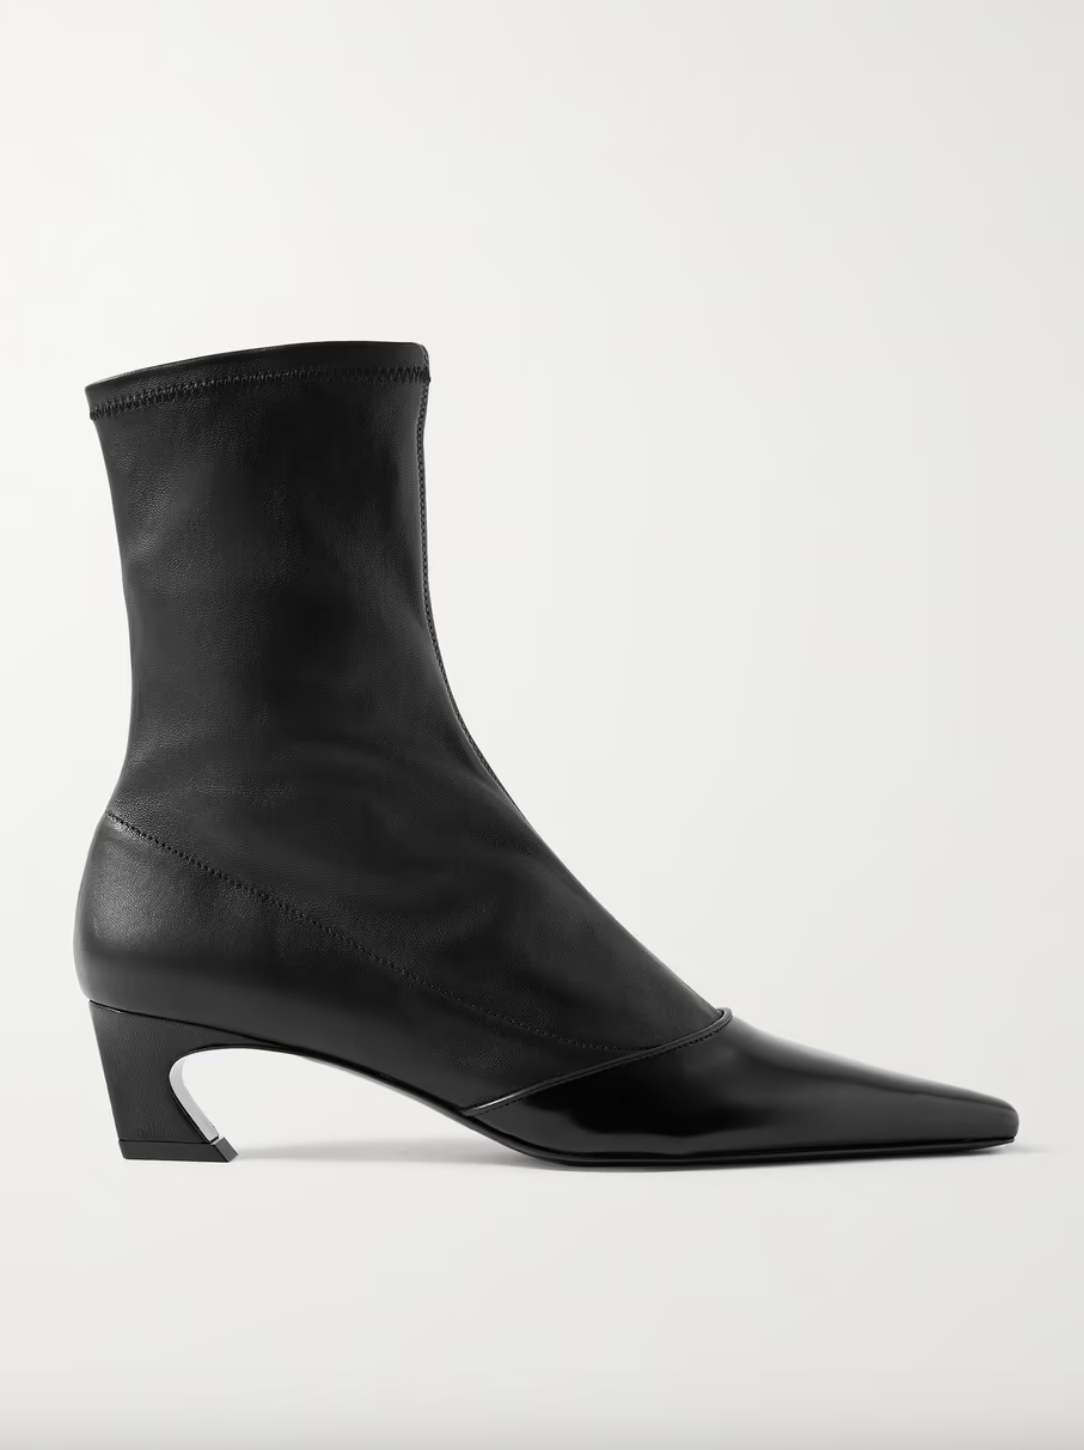 Acne Studios Patent-Trimmed Leather Ankle Boots